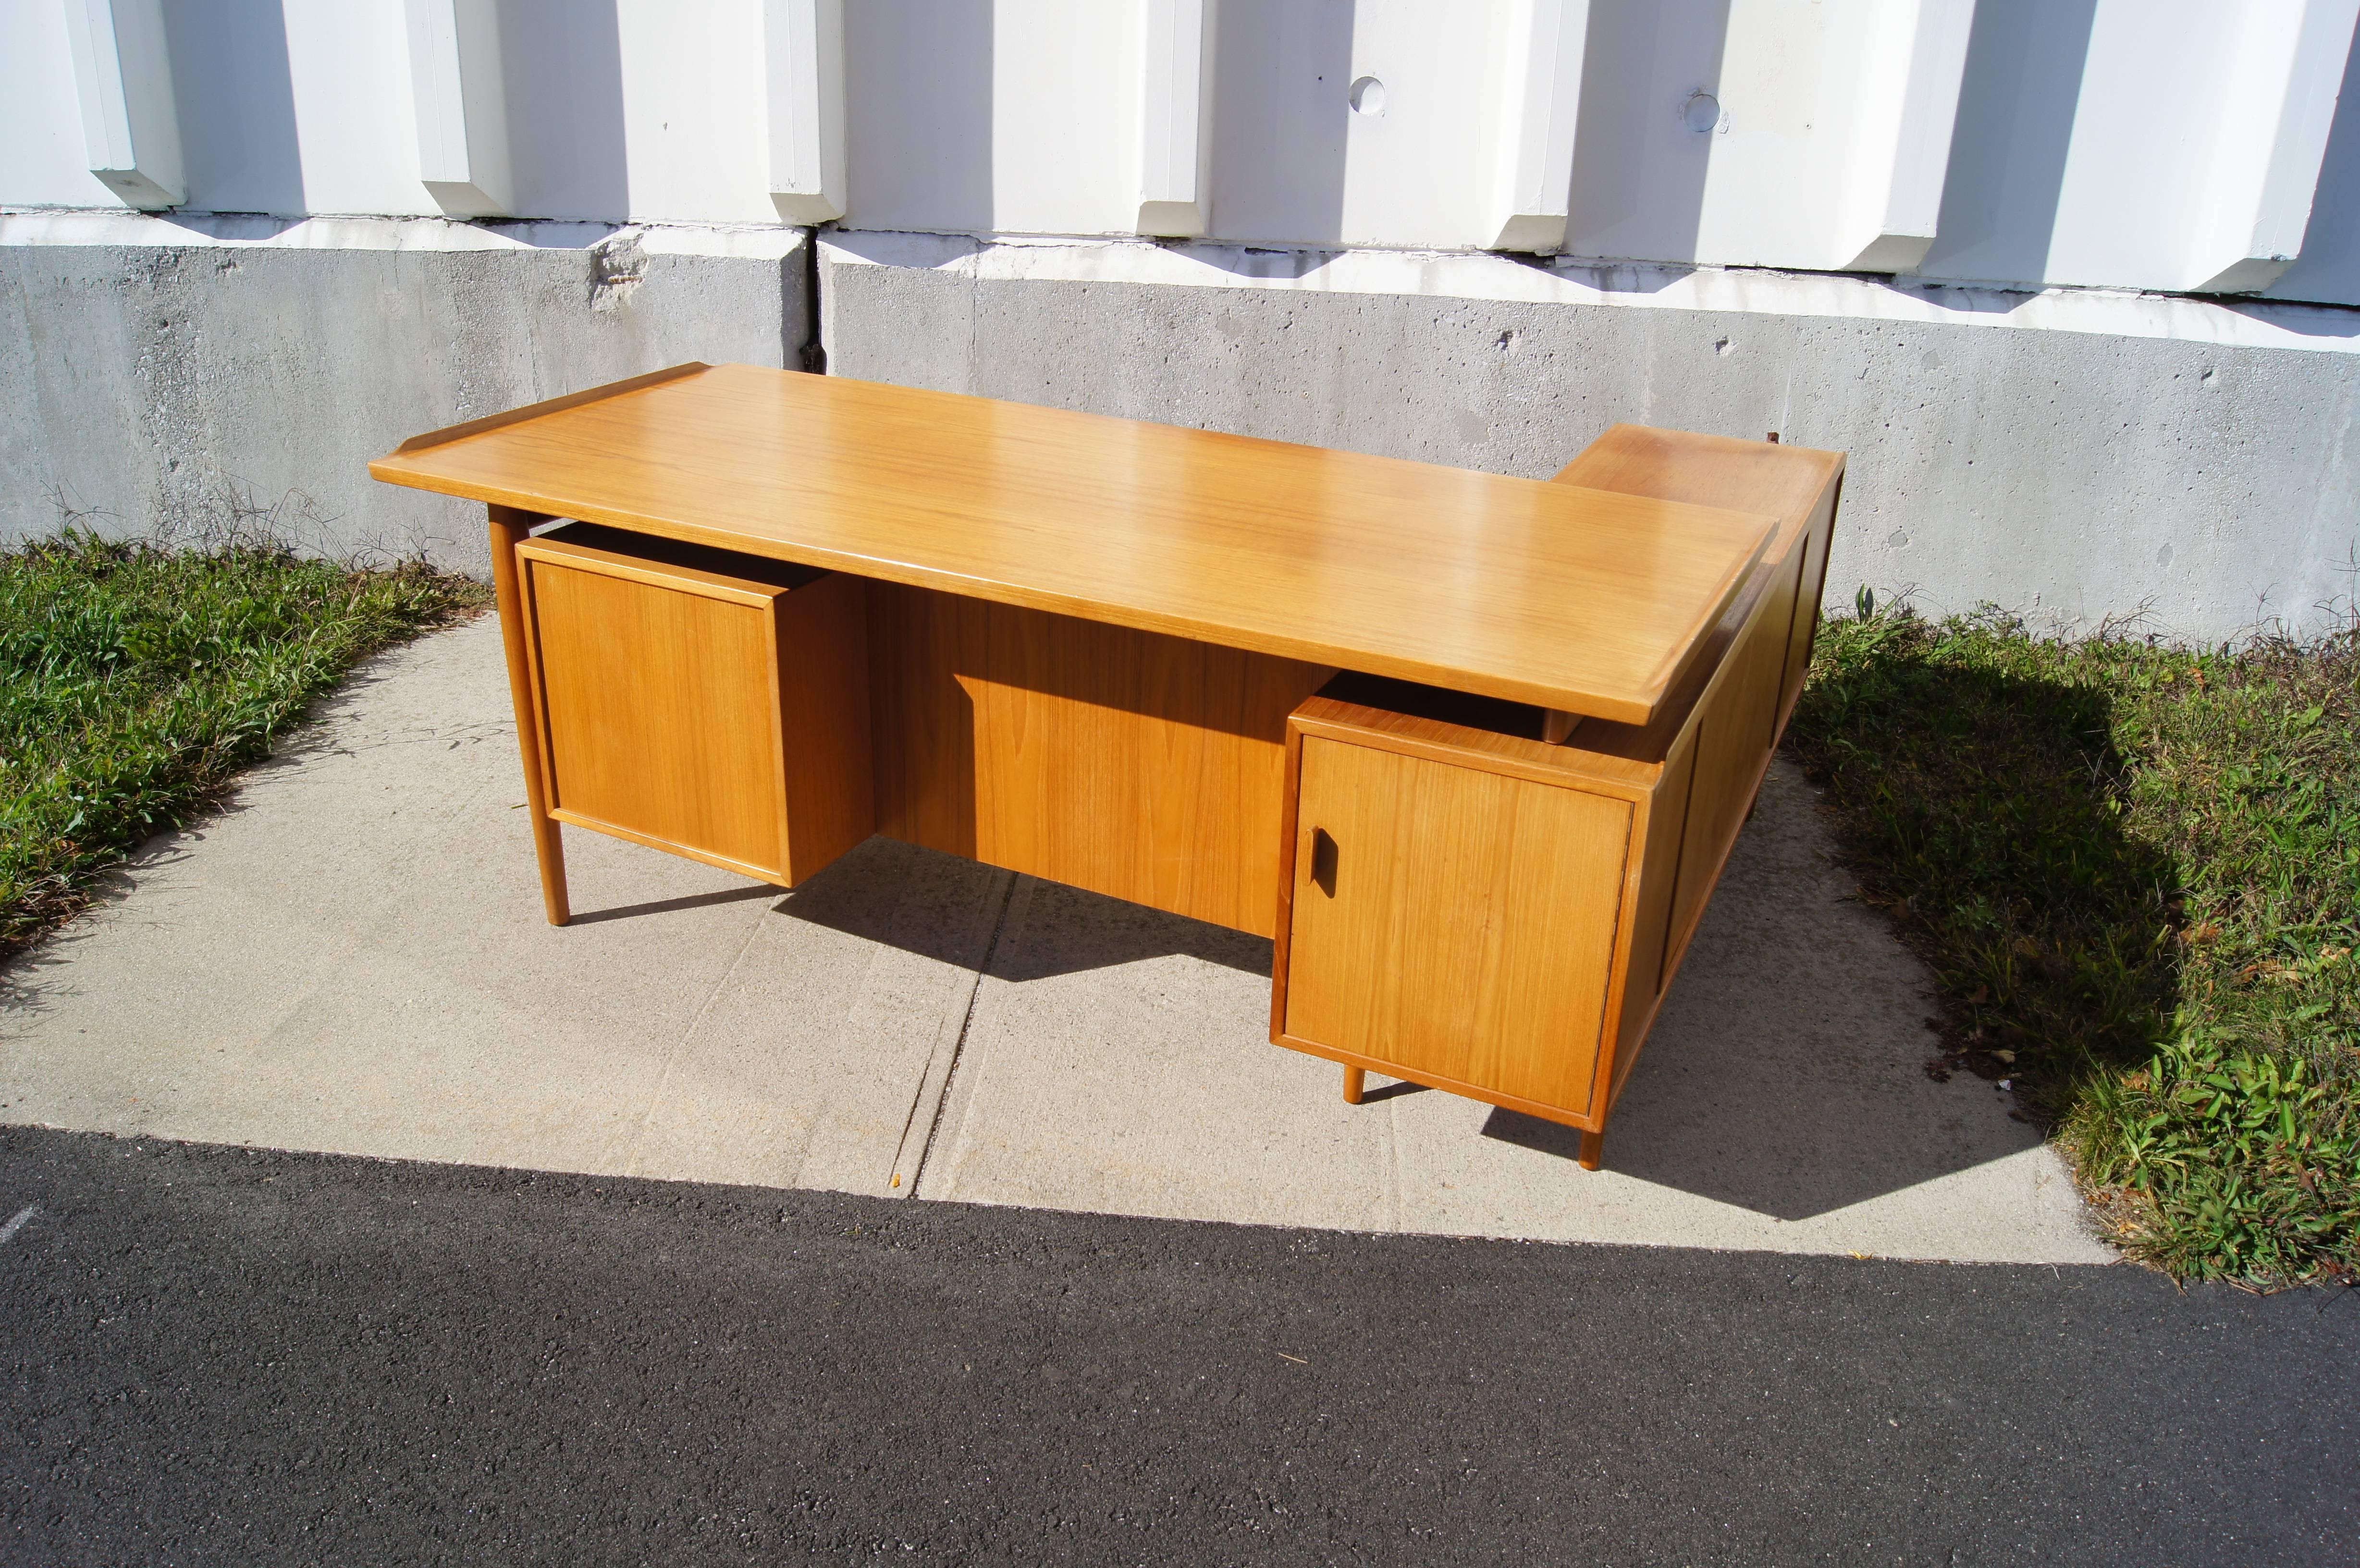 This desk was designed by Arne Vodder and manufactured in Denmark by Sibast. It is composed of two components, a large desk that rests on a lower credenza, that together form an L-shape. The desk has ample storage, including multiple drawers, a file